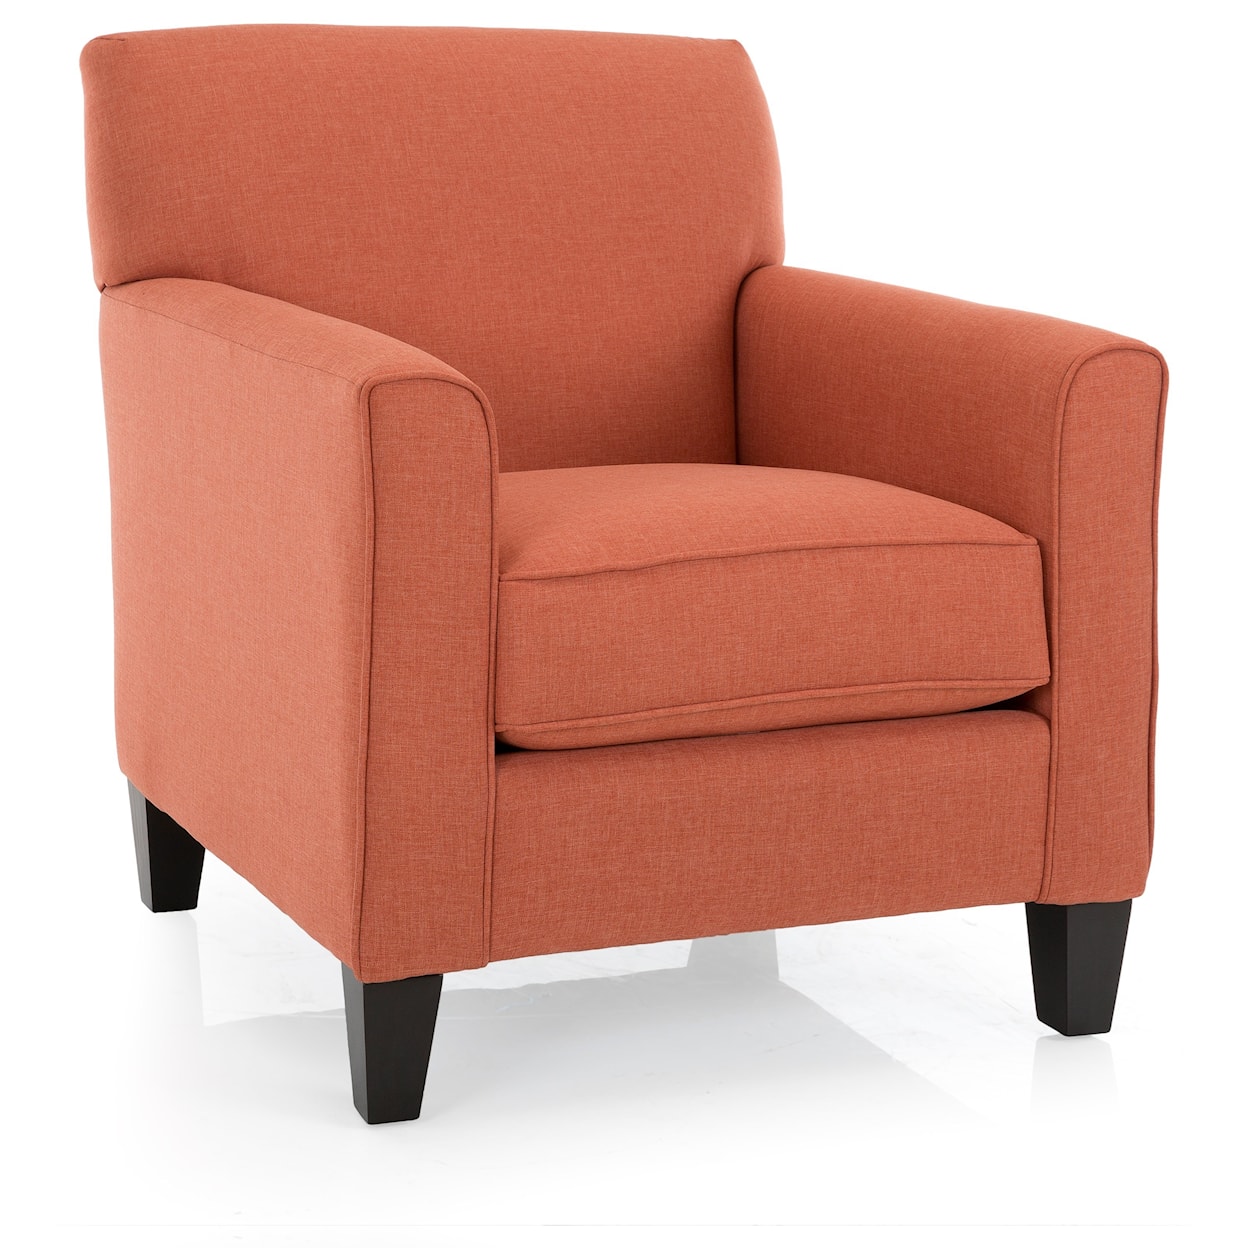 Decor-Rest 2468 Transitional Accent Chair